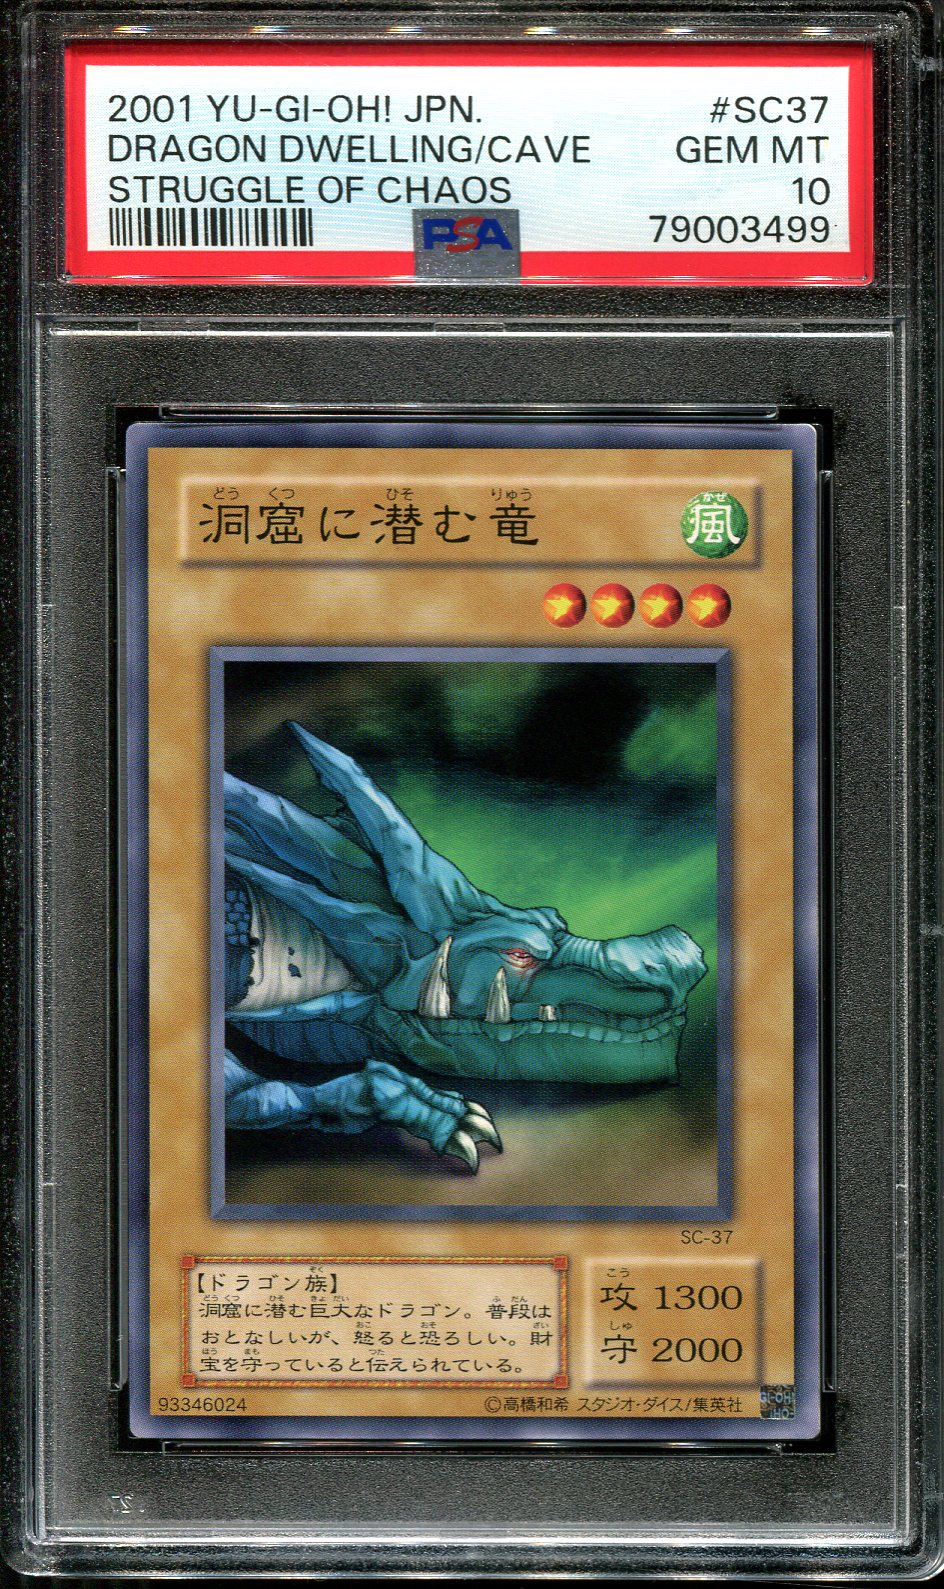 YUGIOH - PSA 10 - DRAGON DWELLING IN THE CAVE - SC-37 - STRUGGLE OF CHAOS - JAPANESE OCG